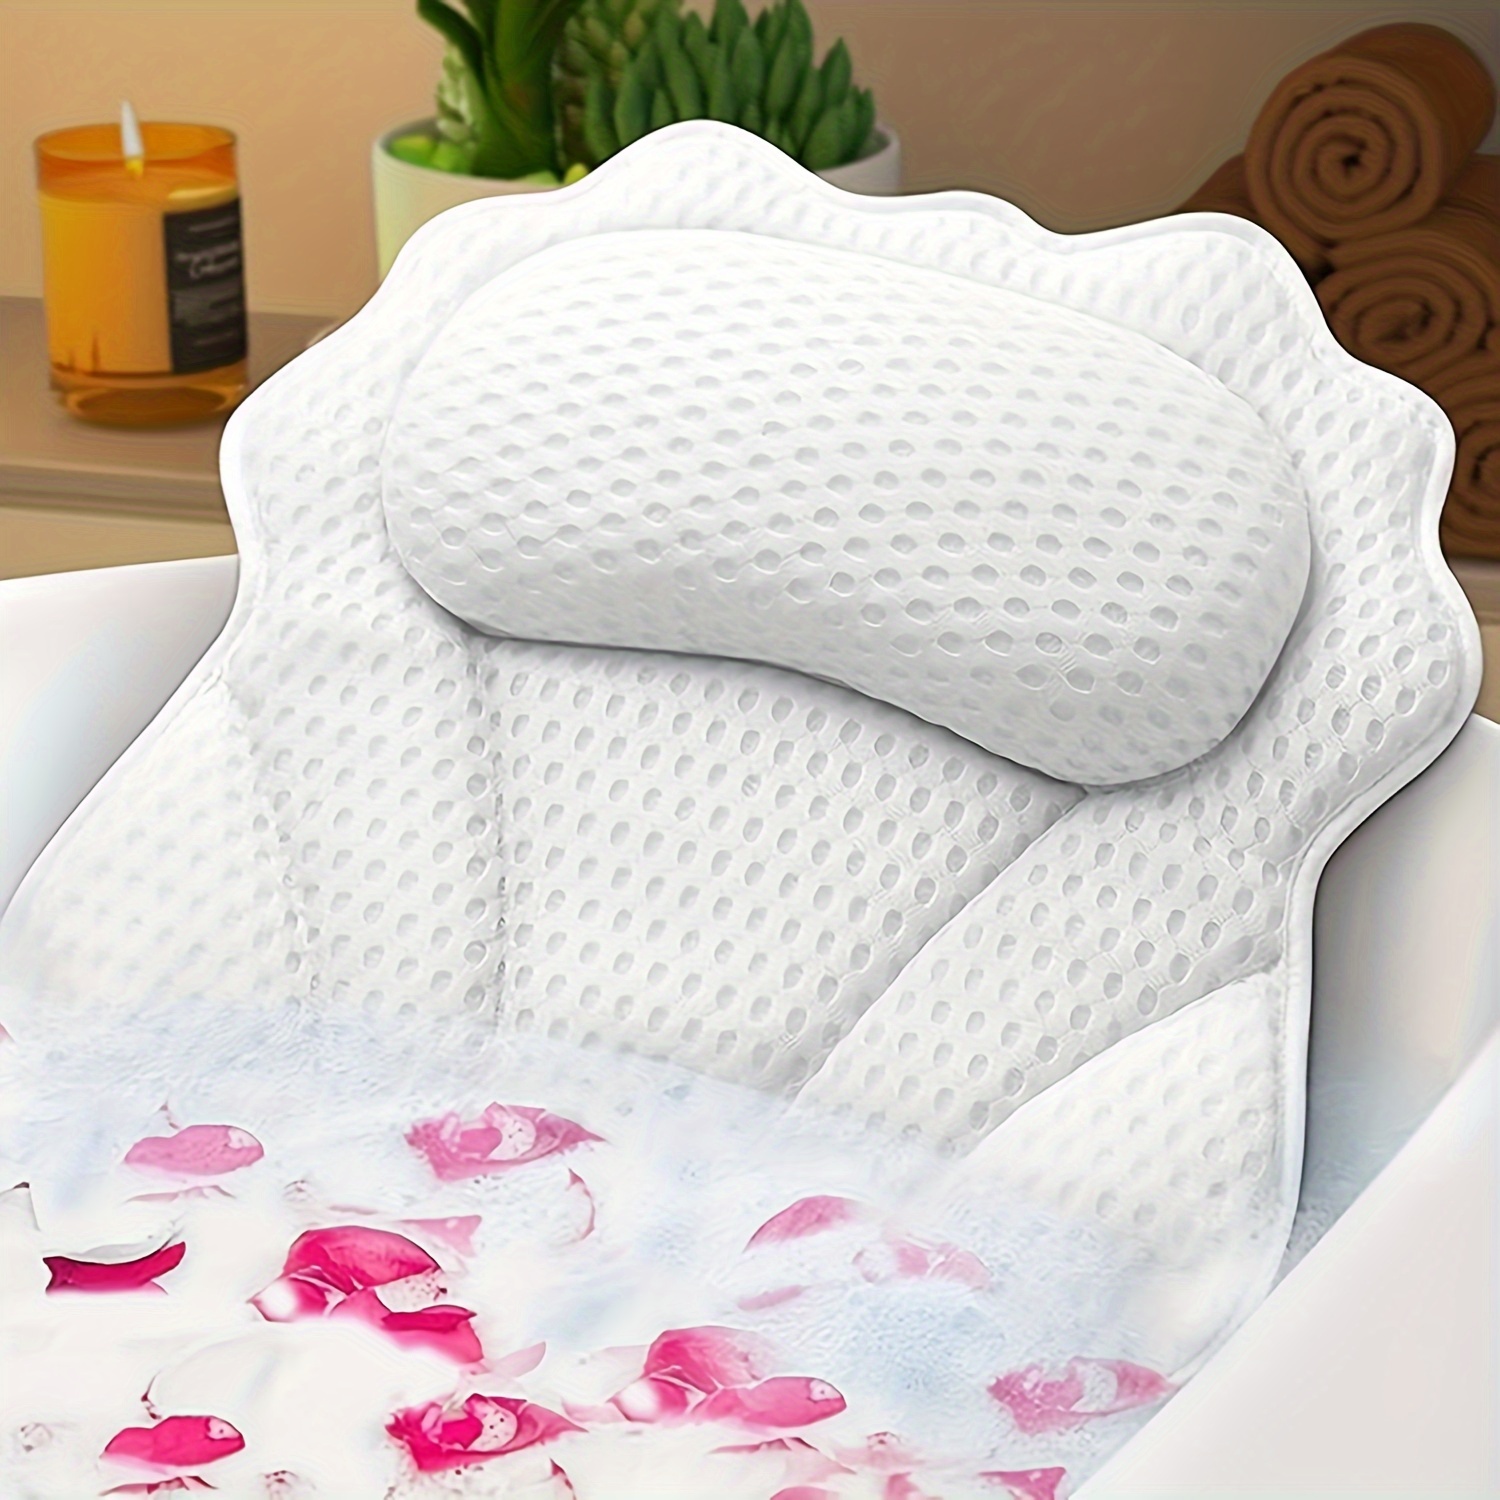 

Ergonomic Pillow, With Head, Neck, Shoulder And Back Support, 4d Bath Pillow With 6 Strong Suction Cups, Suitable For All Bathtubs